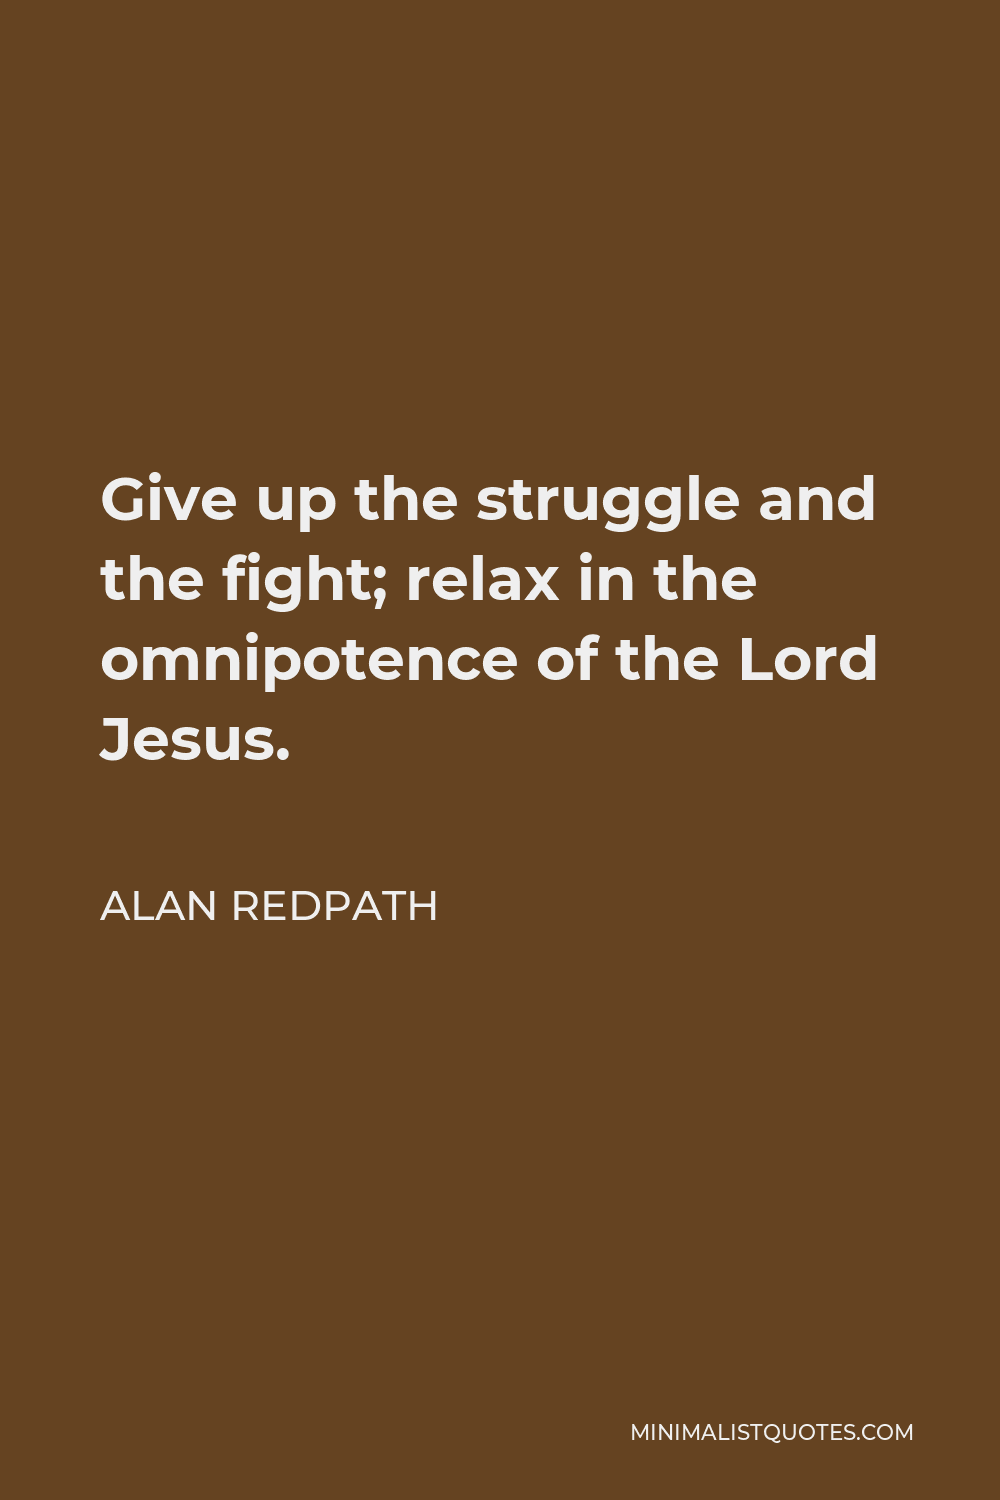 Alan Redpath Quote - Give up the struggle and the fight; relax in the omnipotence of the Lord Jesus.